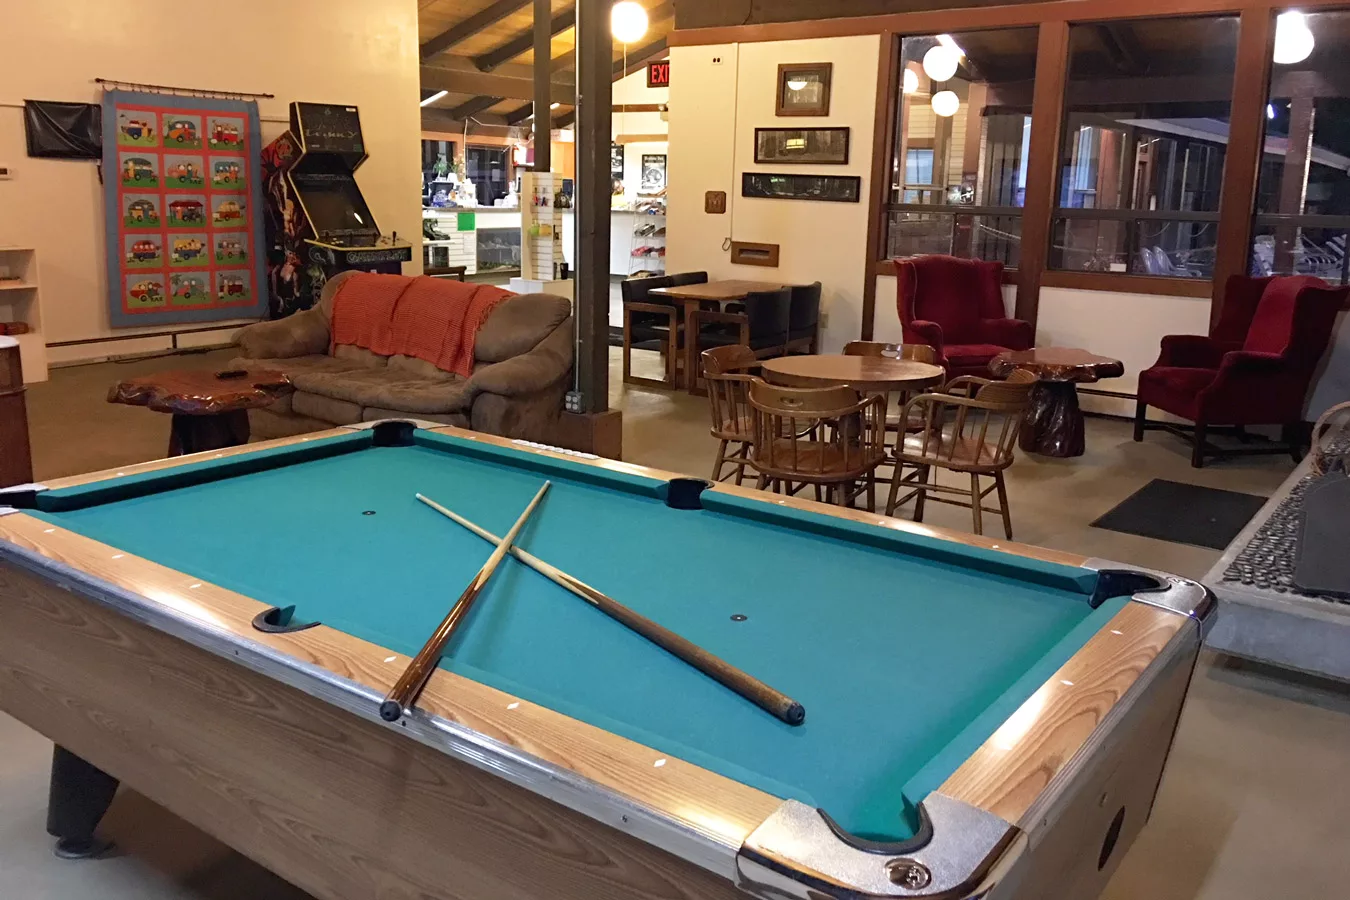 banner image is of KOA Game Room pool table and arcade | Benbow Historic Inn